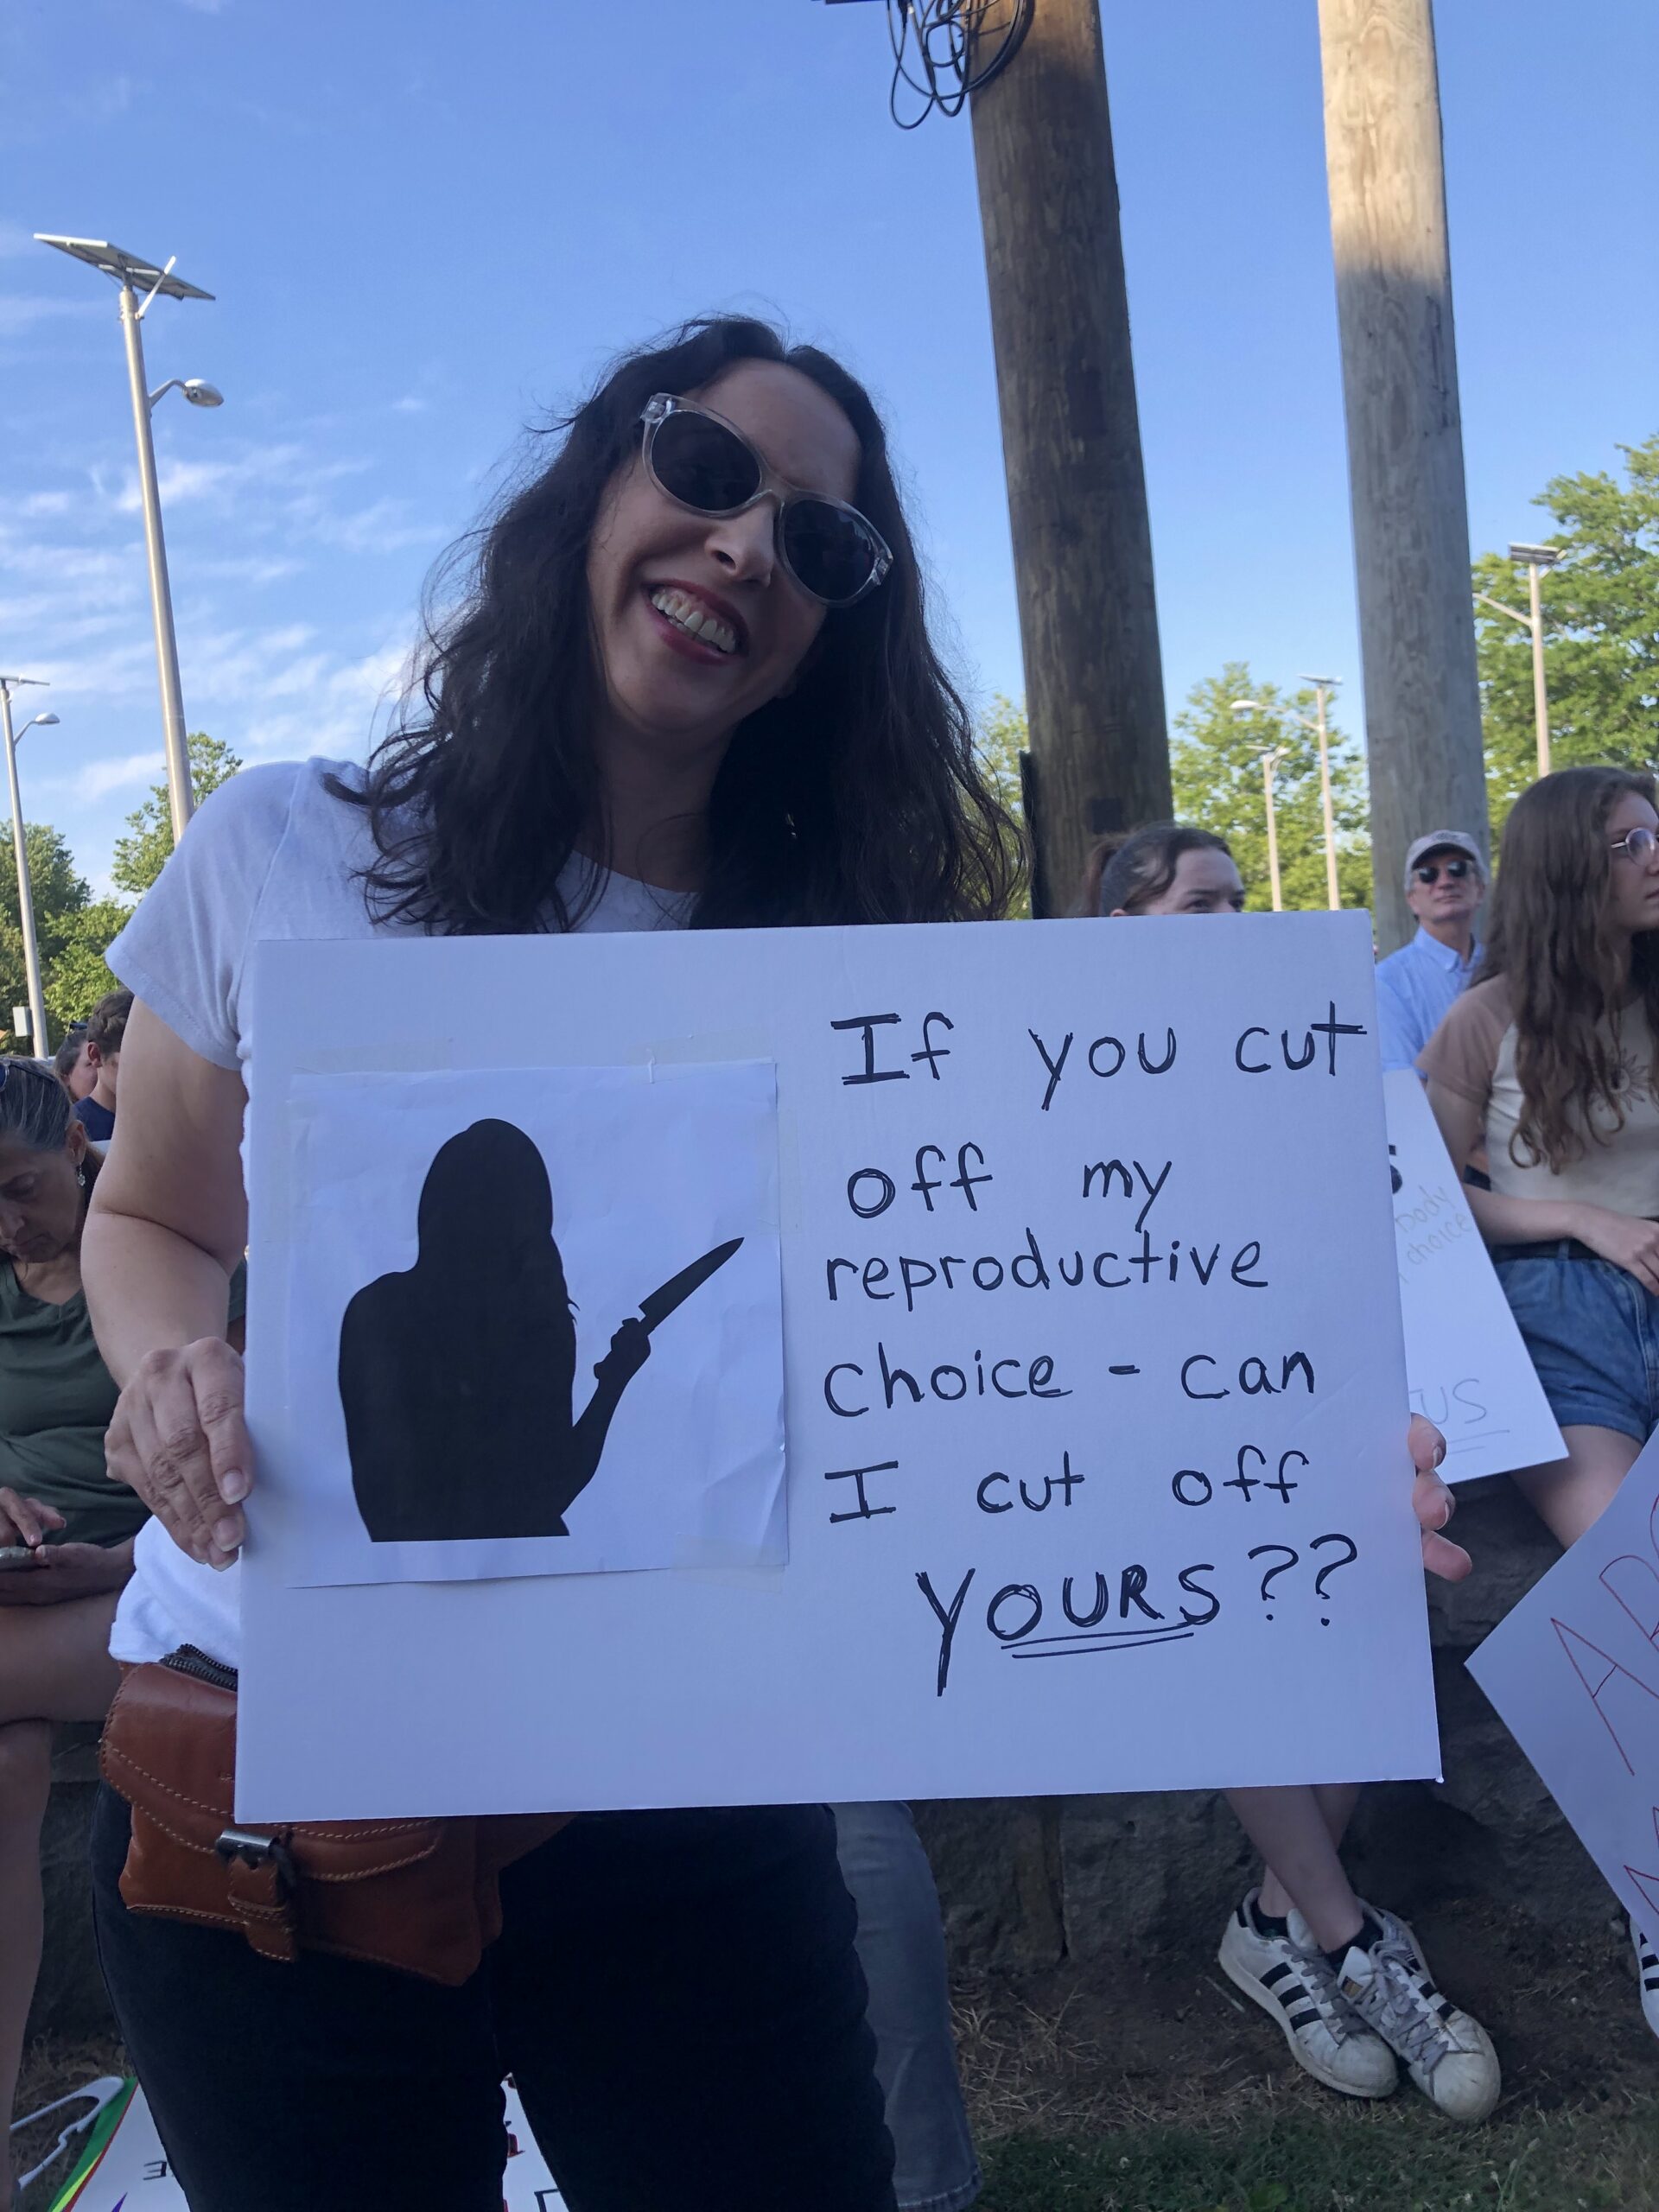 Protesters brought homemade signs and banners that expressed their feelings about the overturning of Roe vs. Wade. It was a diverse crowd, with people of all ages, including many who brought their young children with them. CAILIN RILEY PHOTOS